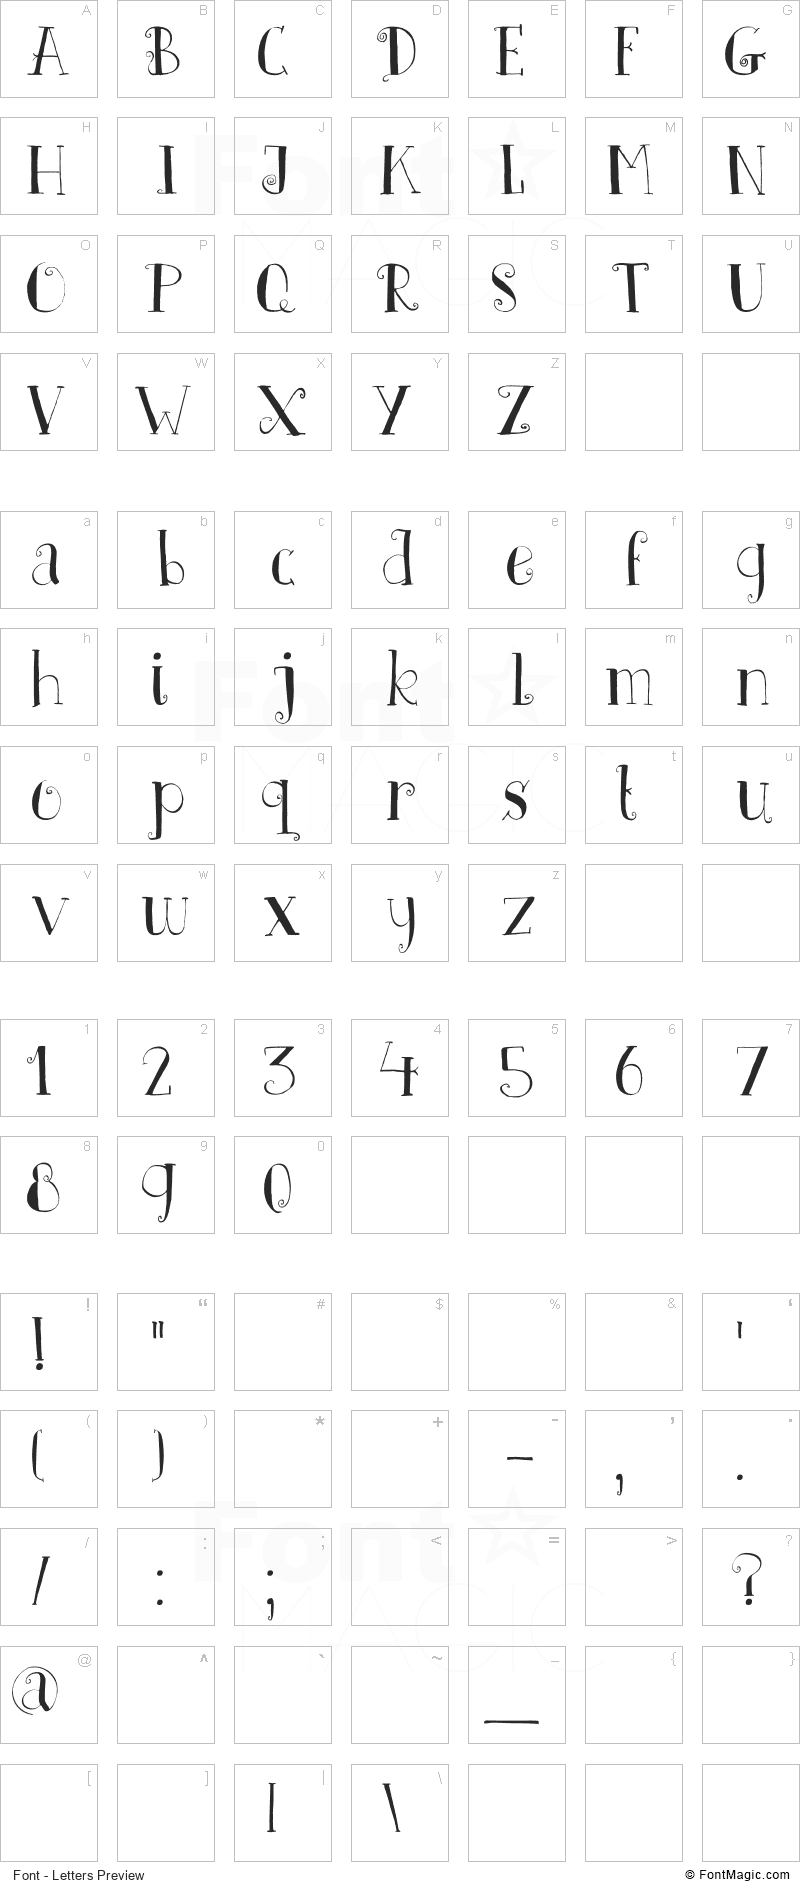 DK Father Frost Font - All Latters Preview Chart